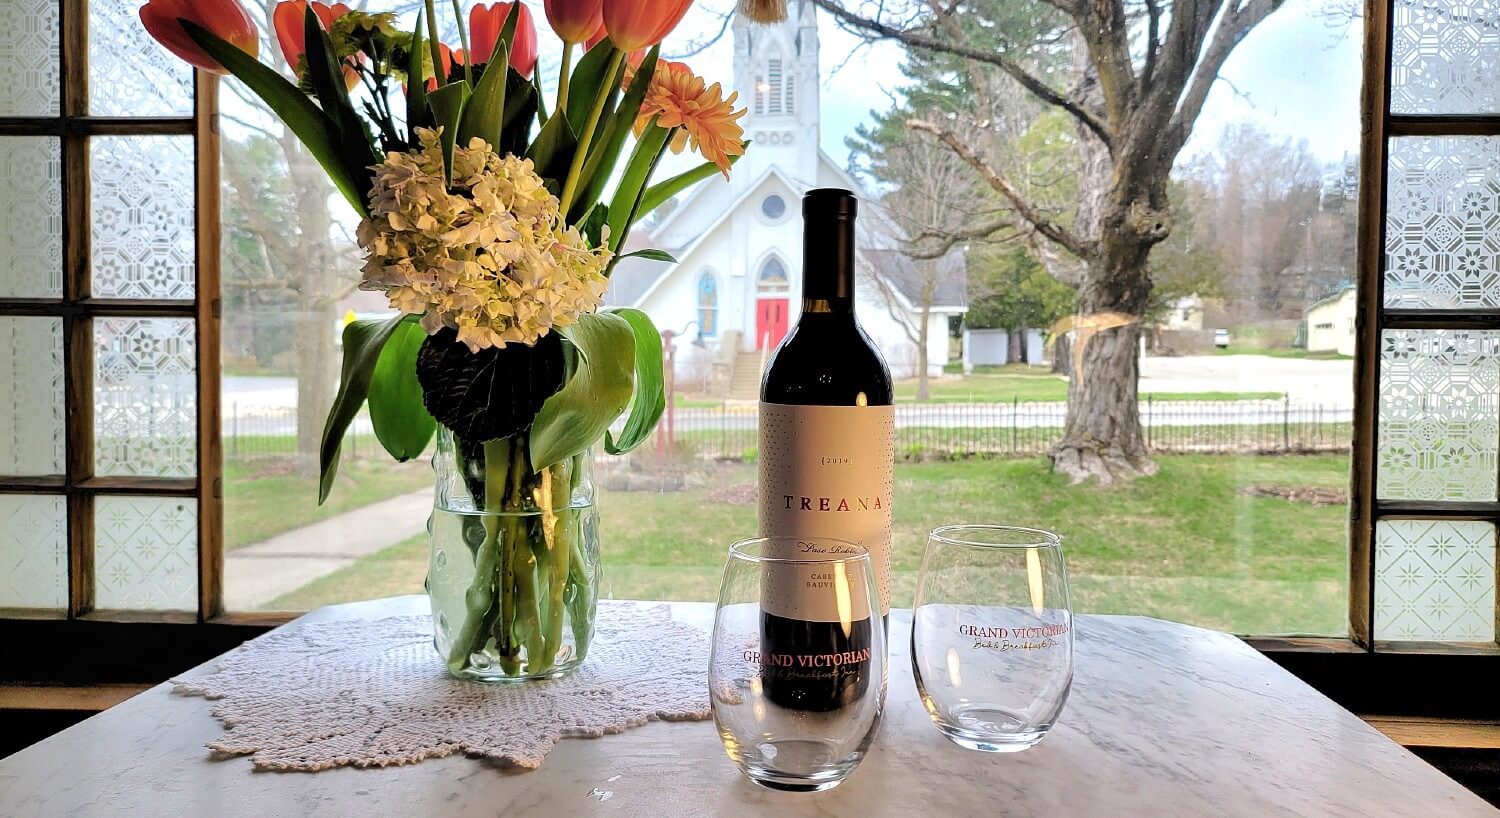 Small white table in front of a window with a bottle of wine, two glasses and a vase of flowers